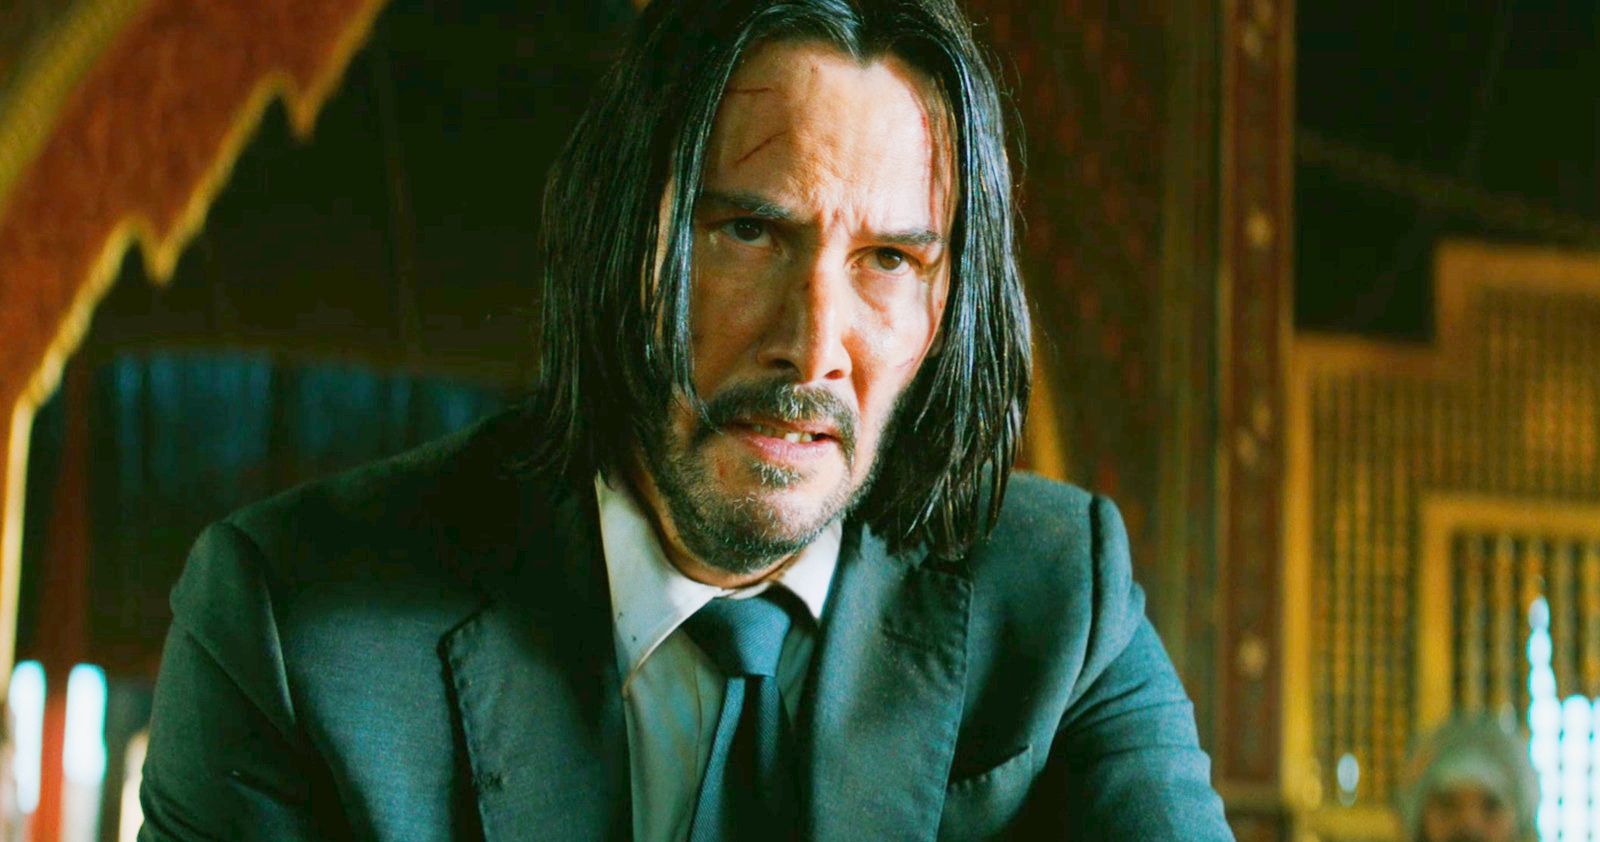 John Wick 4 Wrap Gift Reveals Official Title, What Does It Mean?